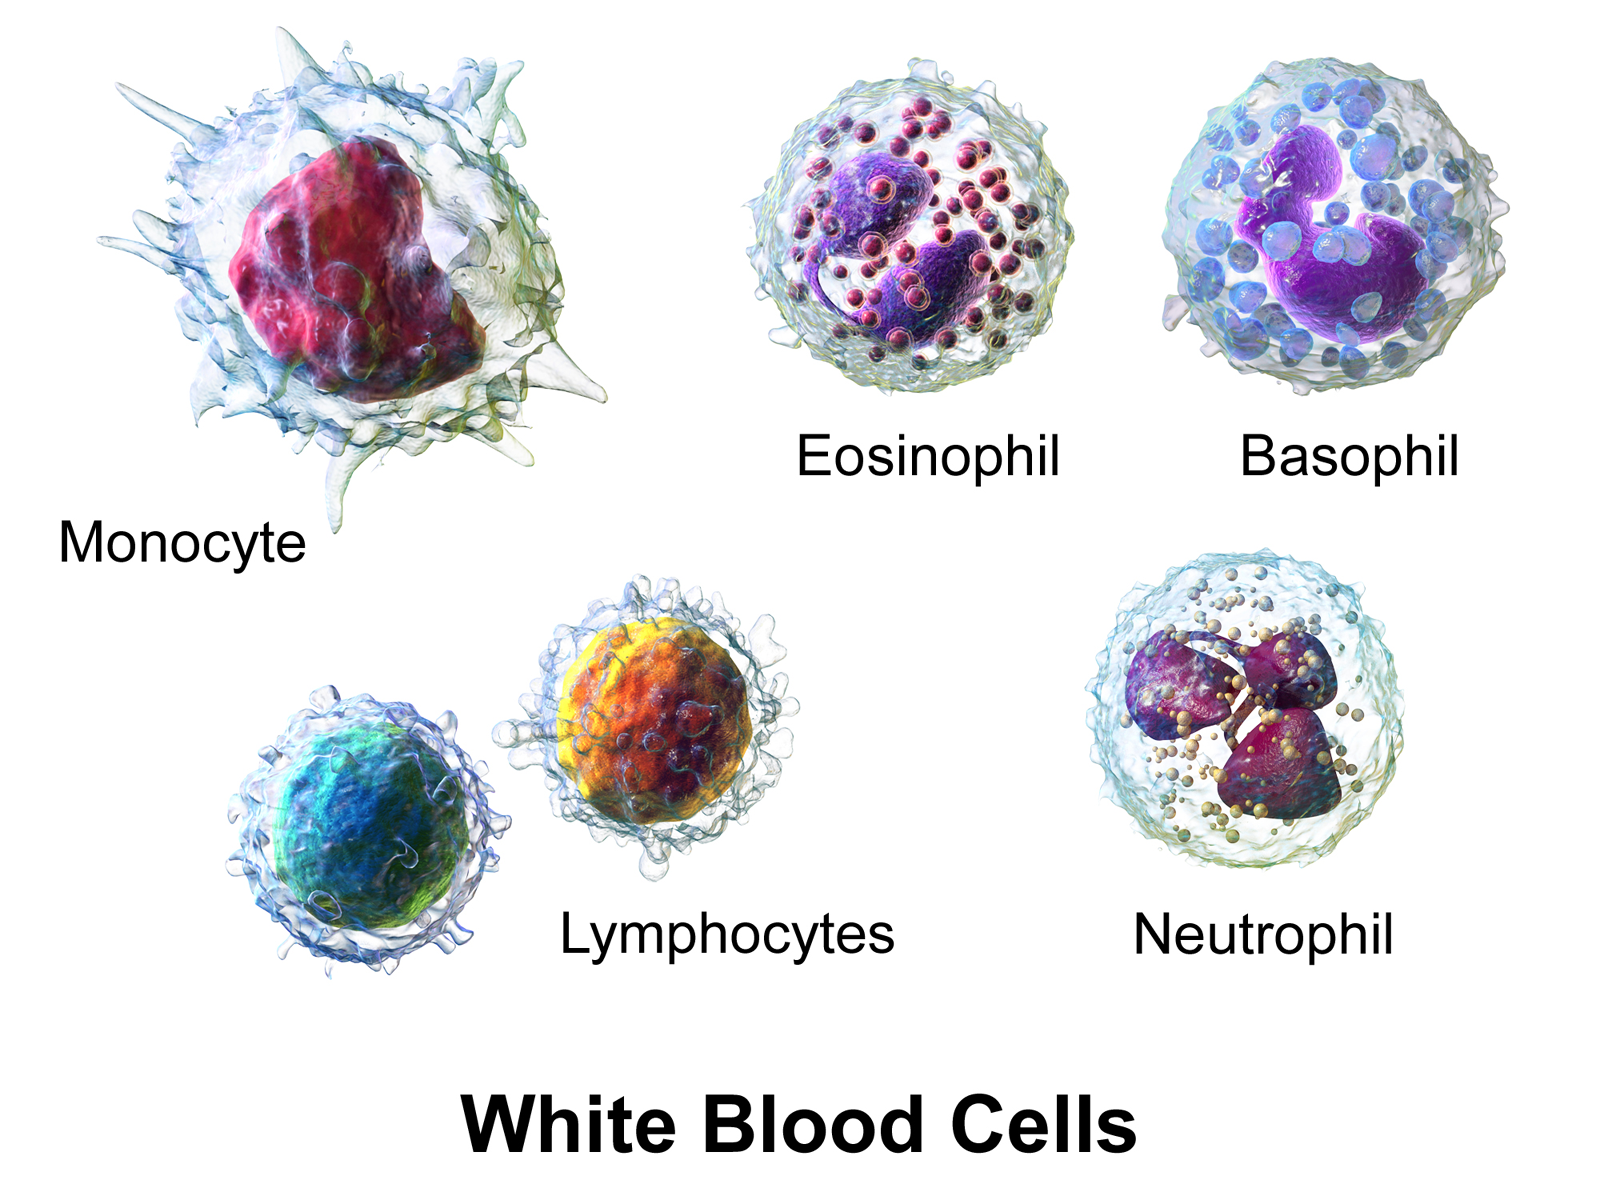 White blood cells include the agranular monocytes and lymphocytes and the granular neutrophils, eosinophils, and basophils.